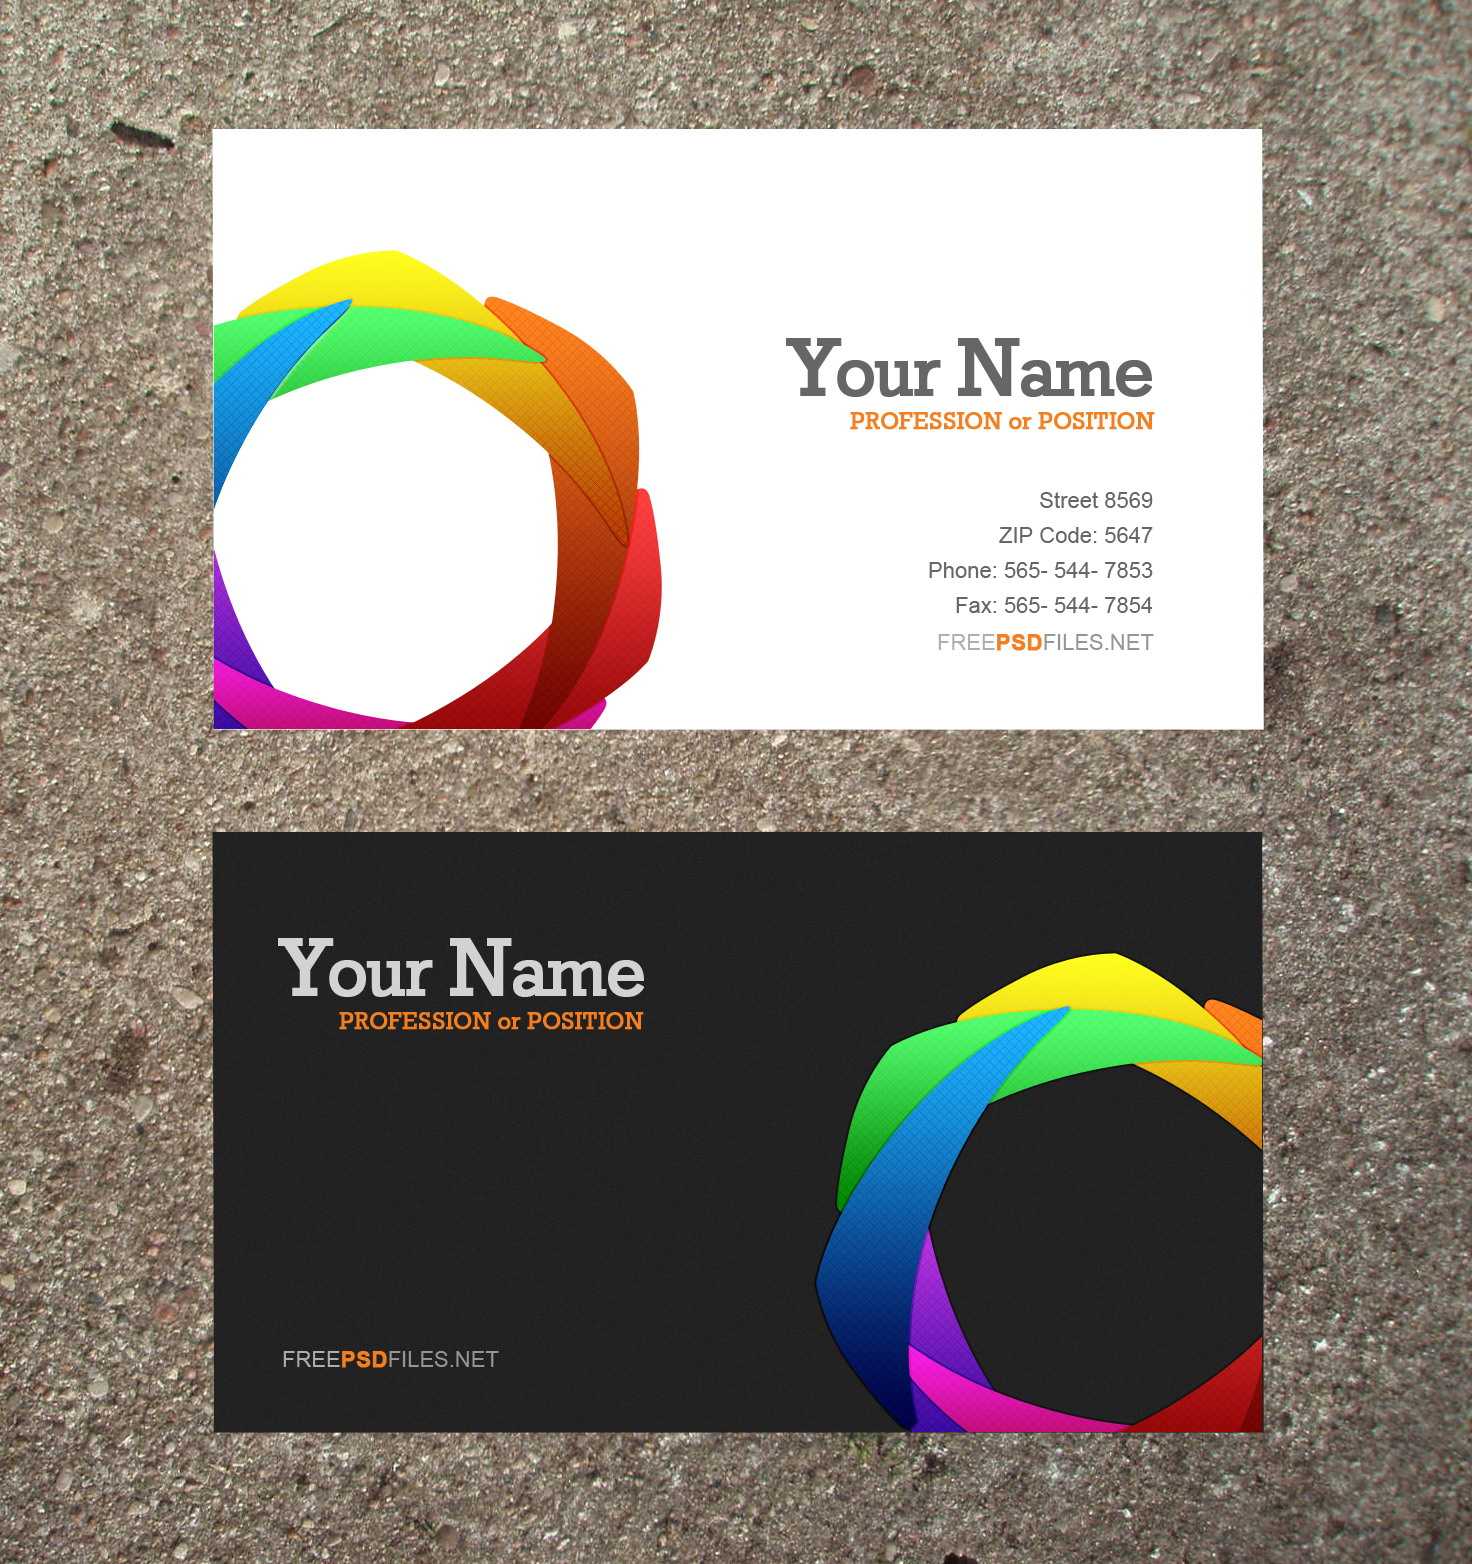 Make Your Own Business Card Design Free – Veppe For Microsoft Office Business Card Template